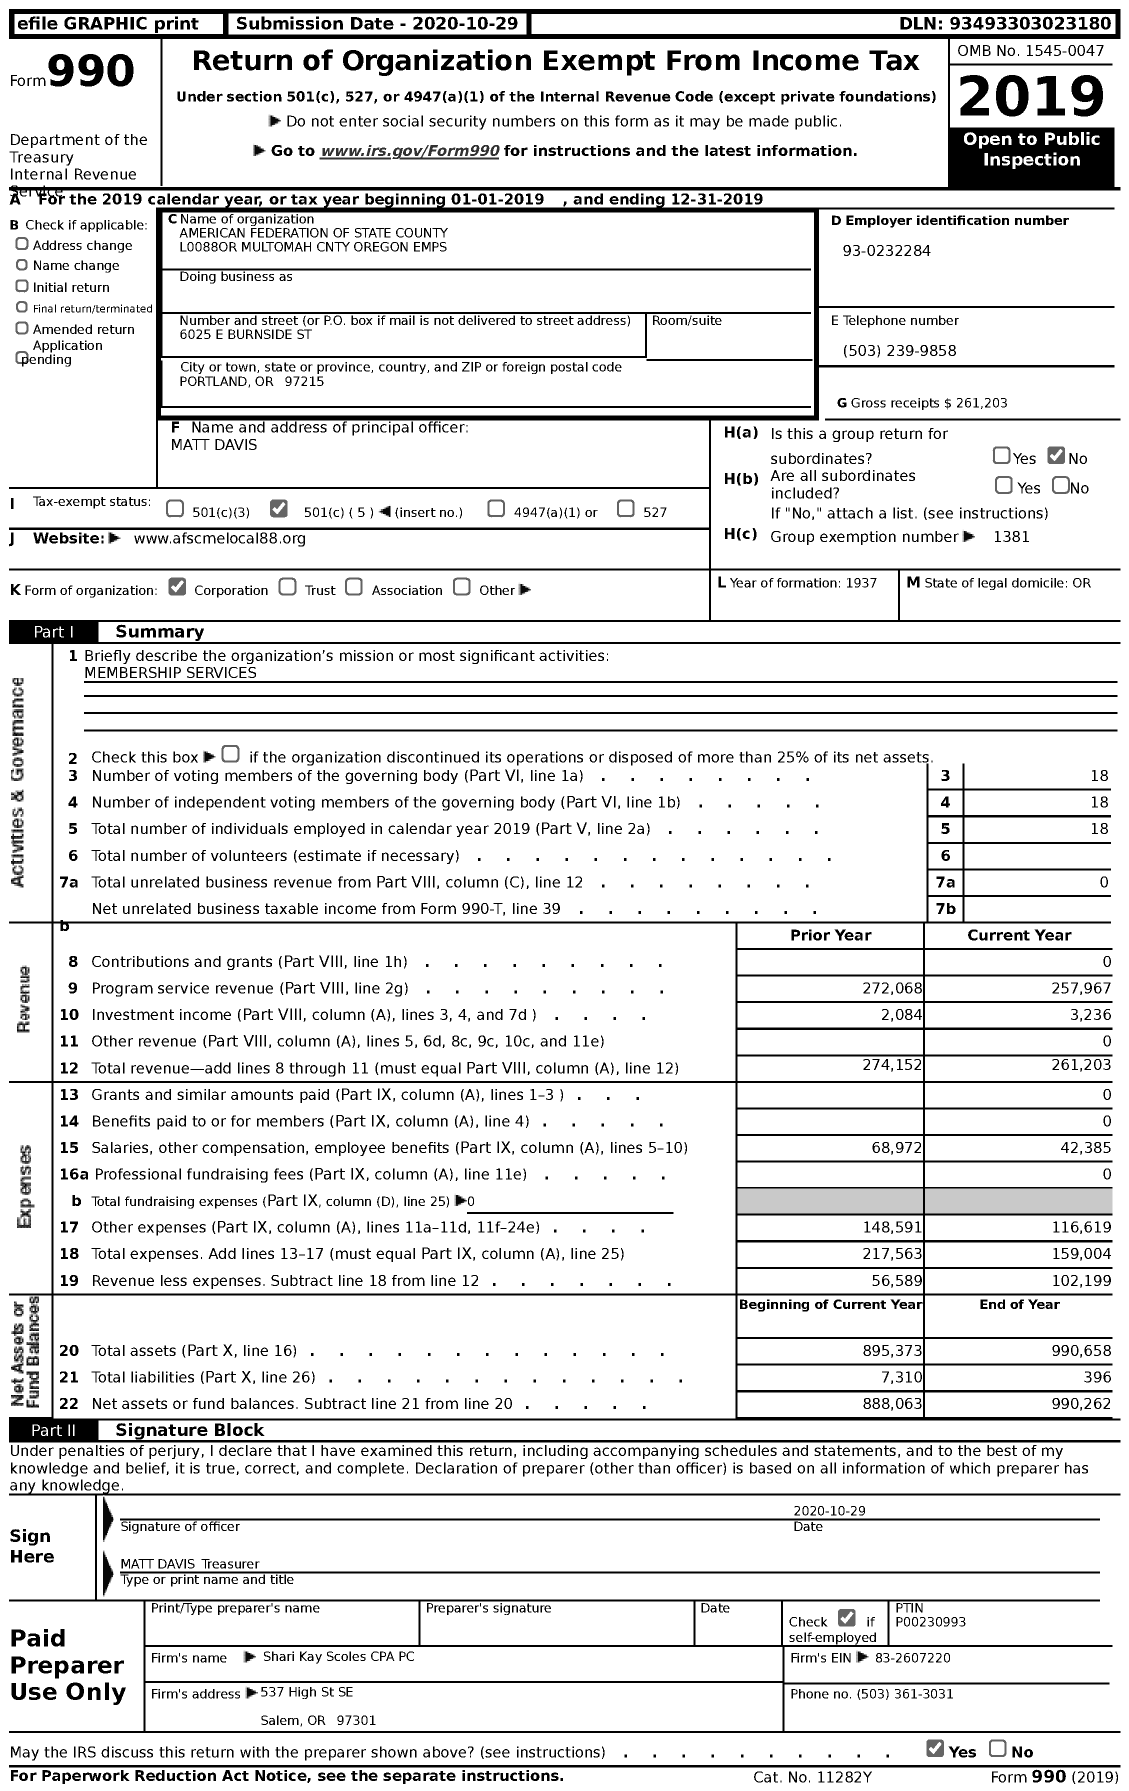 Image of first page of 2019 Form 990 for American Federation of State County & Municipal Employees - L0088or Multomah Cnty Oregon Emps